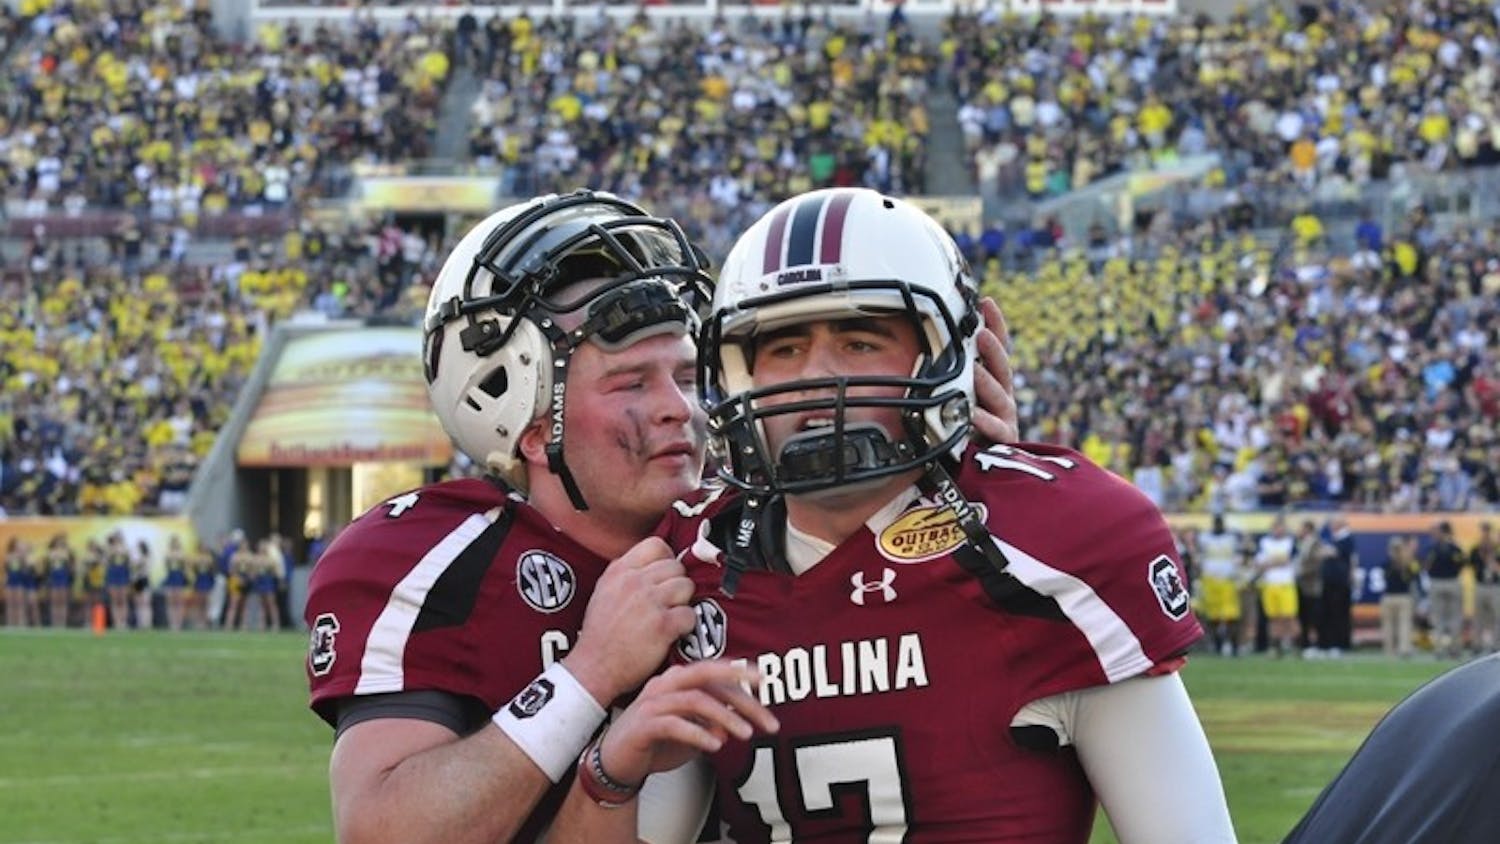 Junior quarterback Connor Shaw (left) was pulled from the game in the middle of USC’s final possession. Sophomore Dylan Thompson (right) threw the game-winning pass.